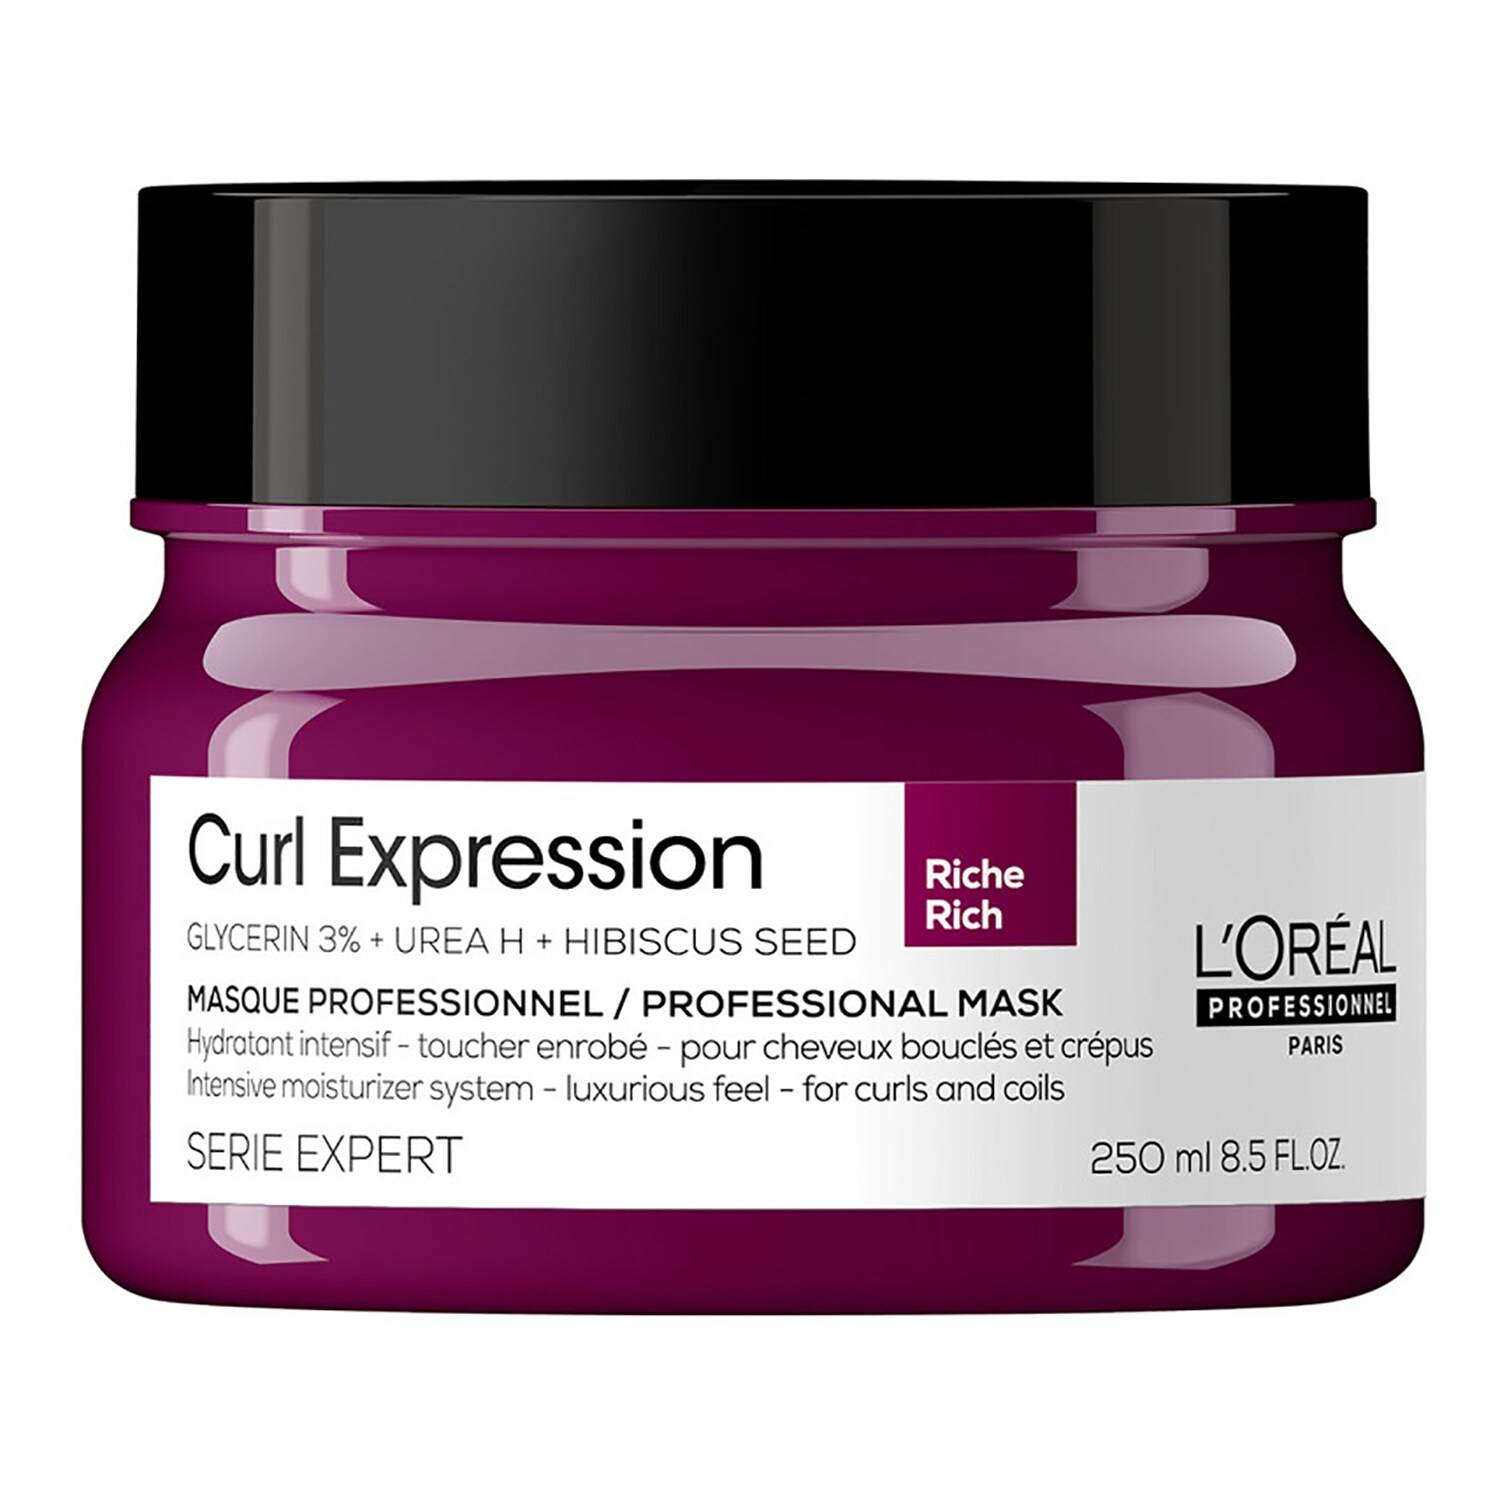 L'Oreal Professionnel Curl Expression Hair Rich Mask 250Ml